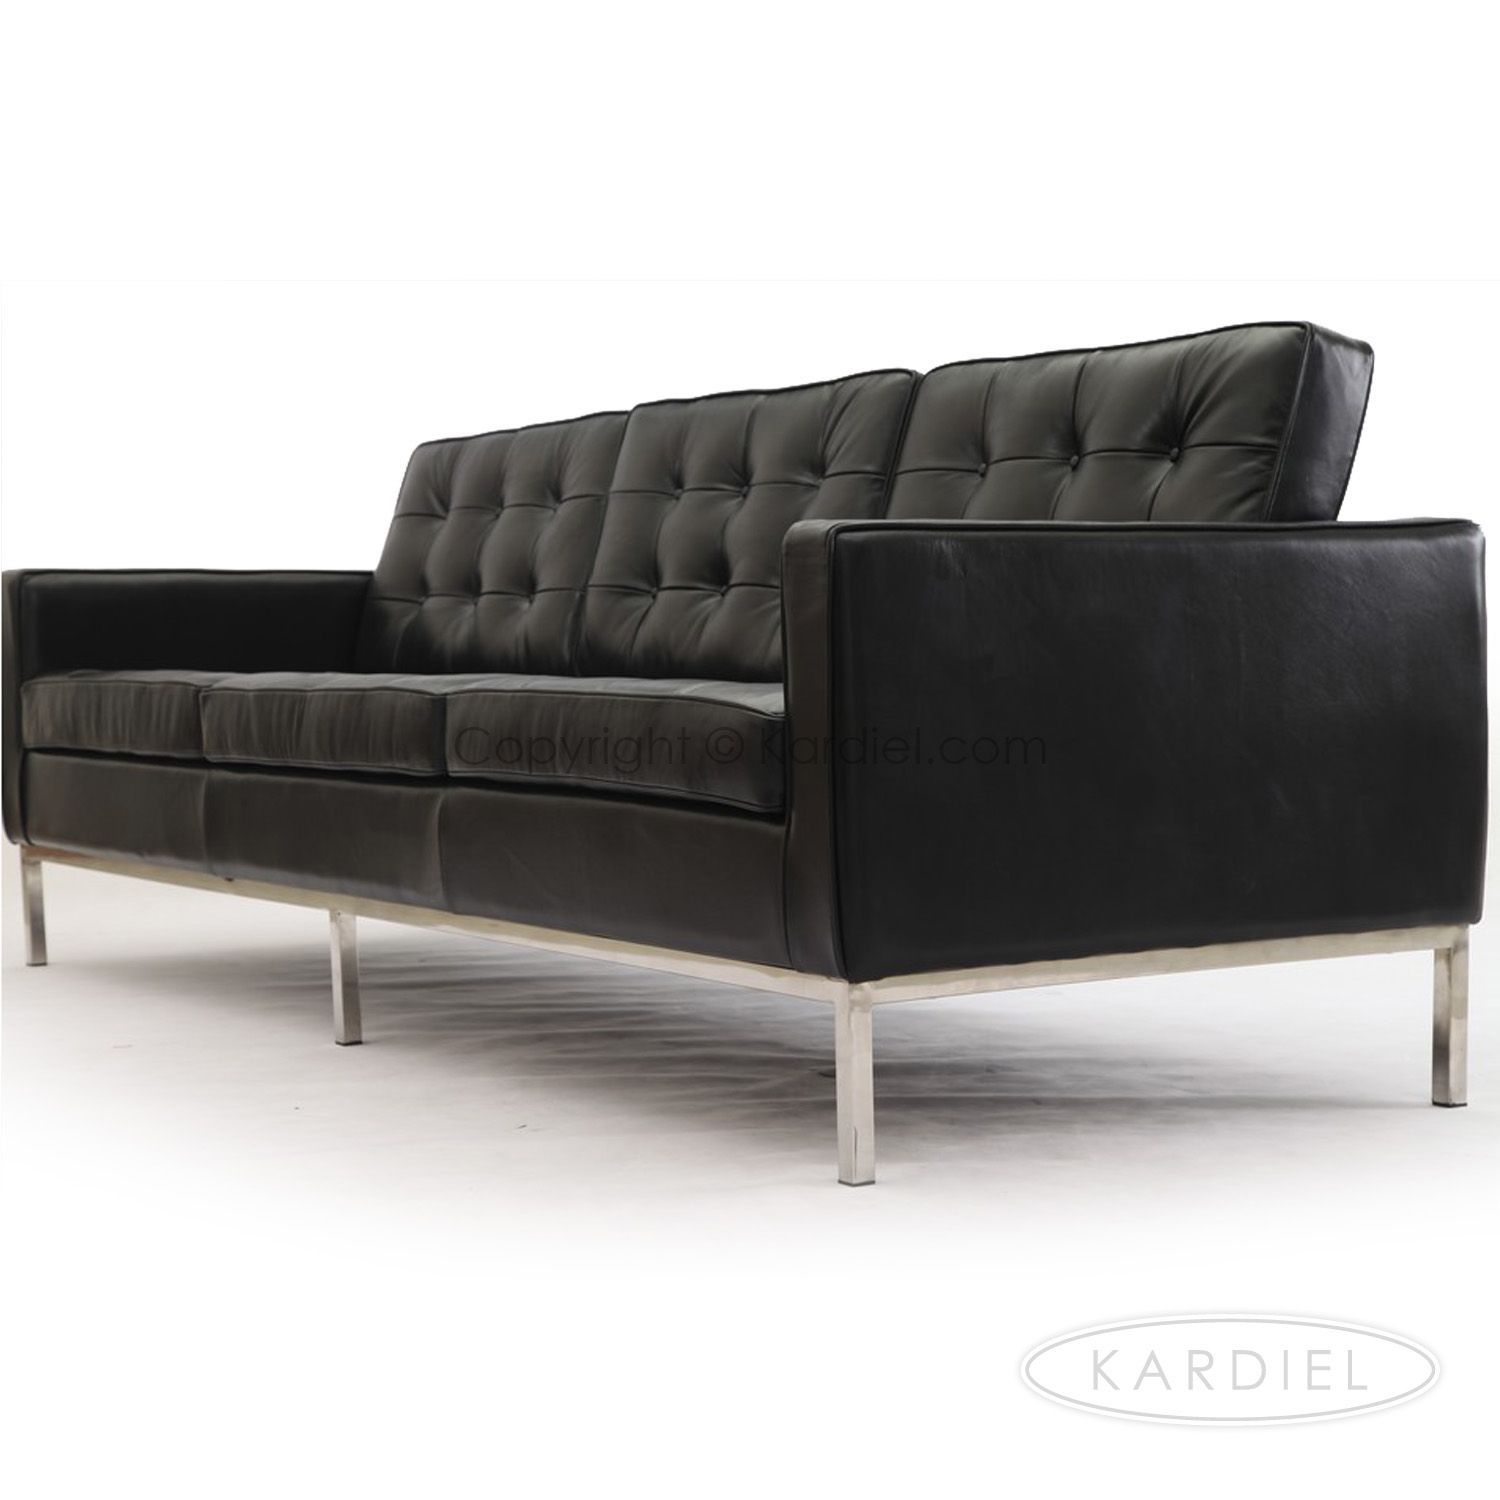 Florence Knoll Sofa Settee Reproduction Style 3 Seater In Florence Knoll 3 Seater Sofas (View 11 of 15)